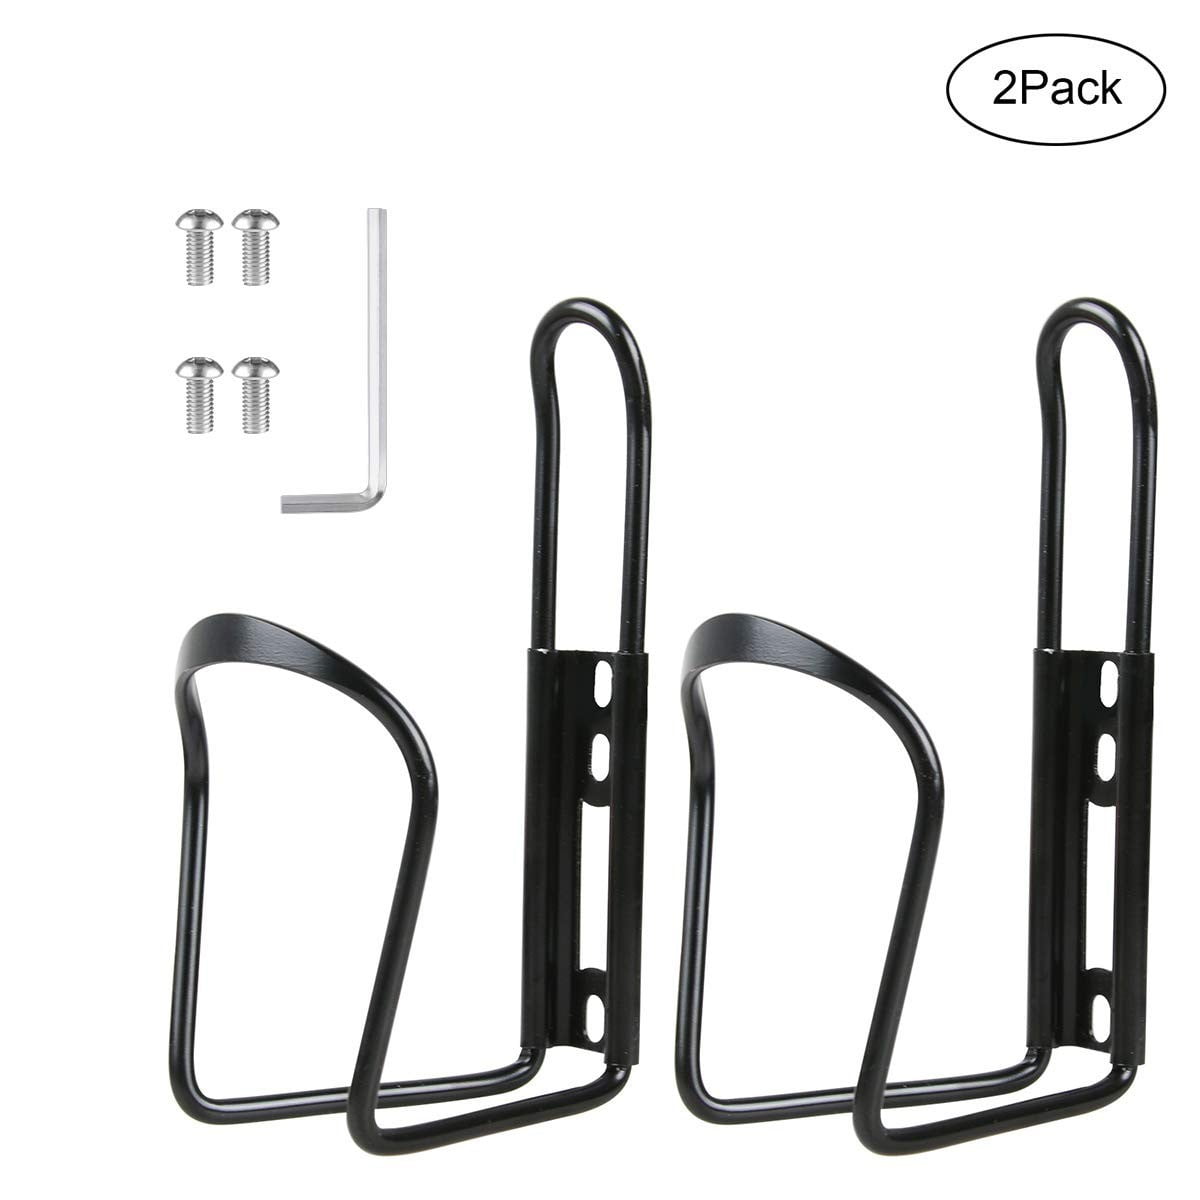 2 Pack Bike Water Bottle Holder Carrier Bicycle Drink Container Cage Bracket New 